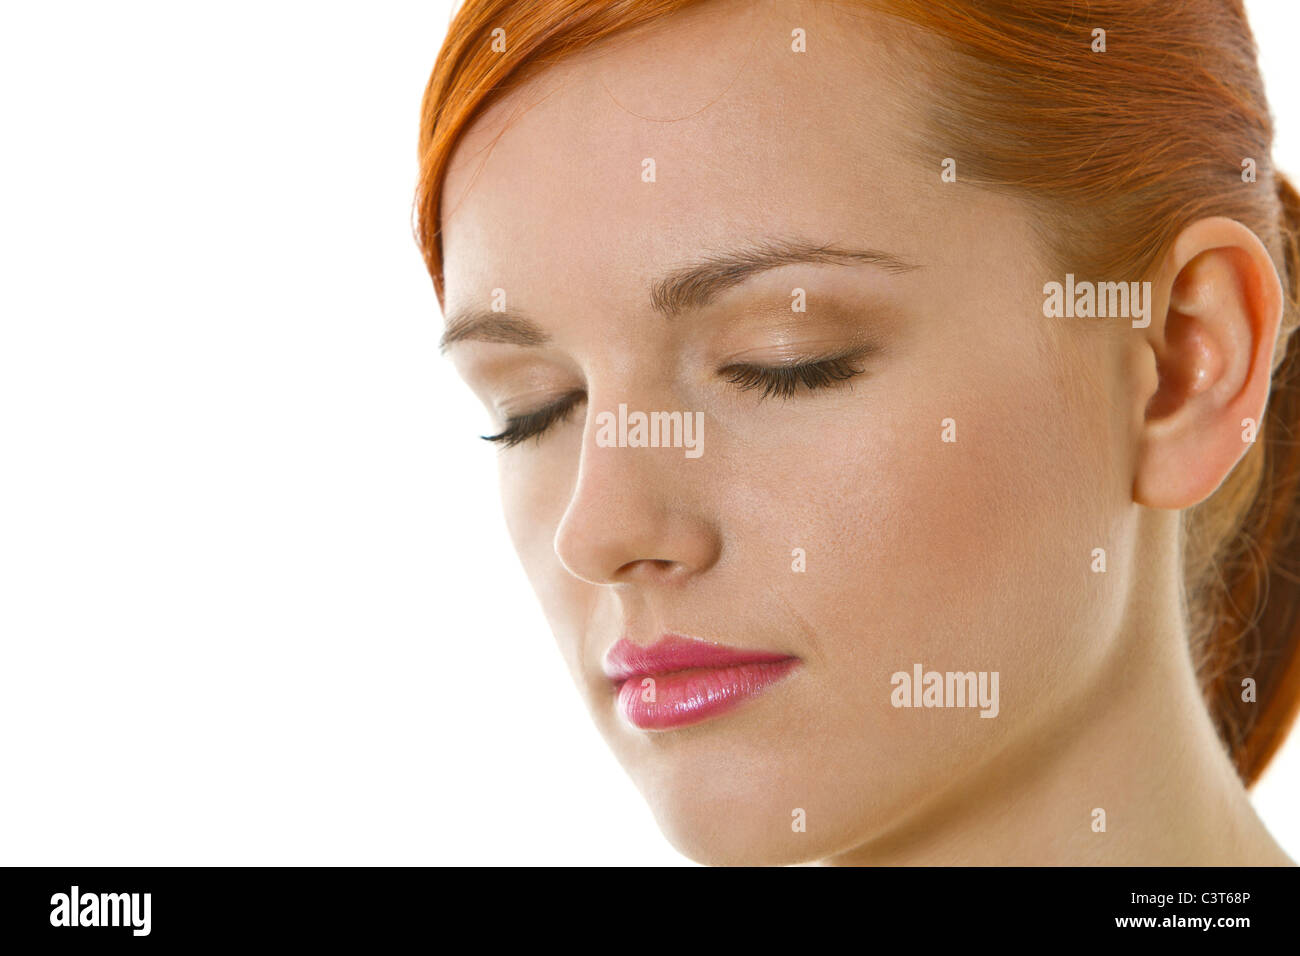 Serious, thoughtful young woman with closed eyes Stock Photo